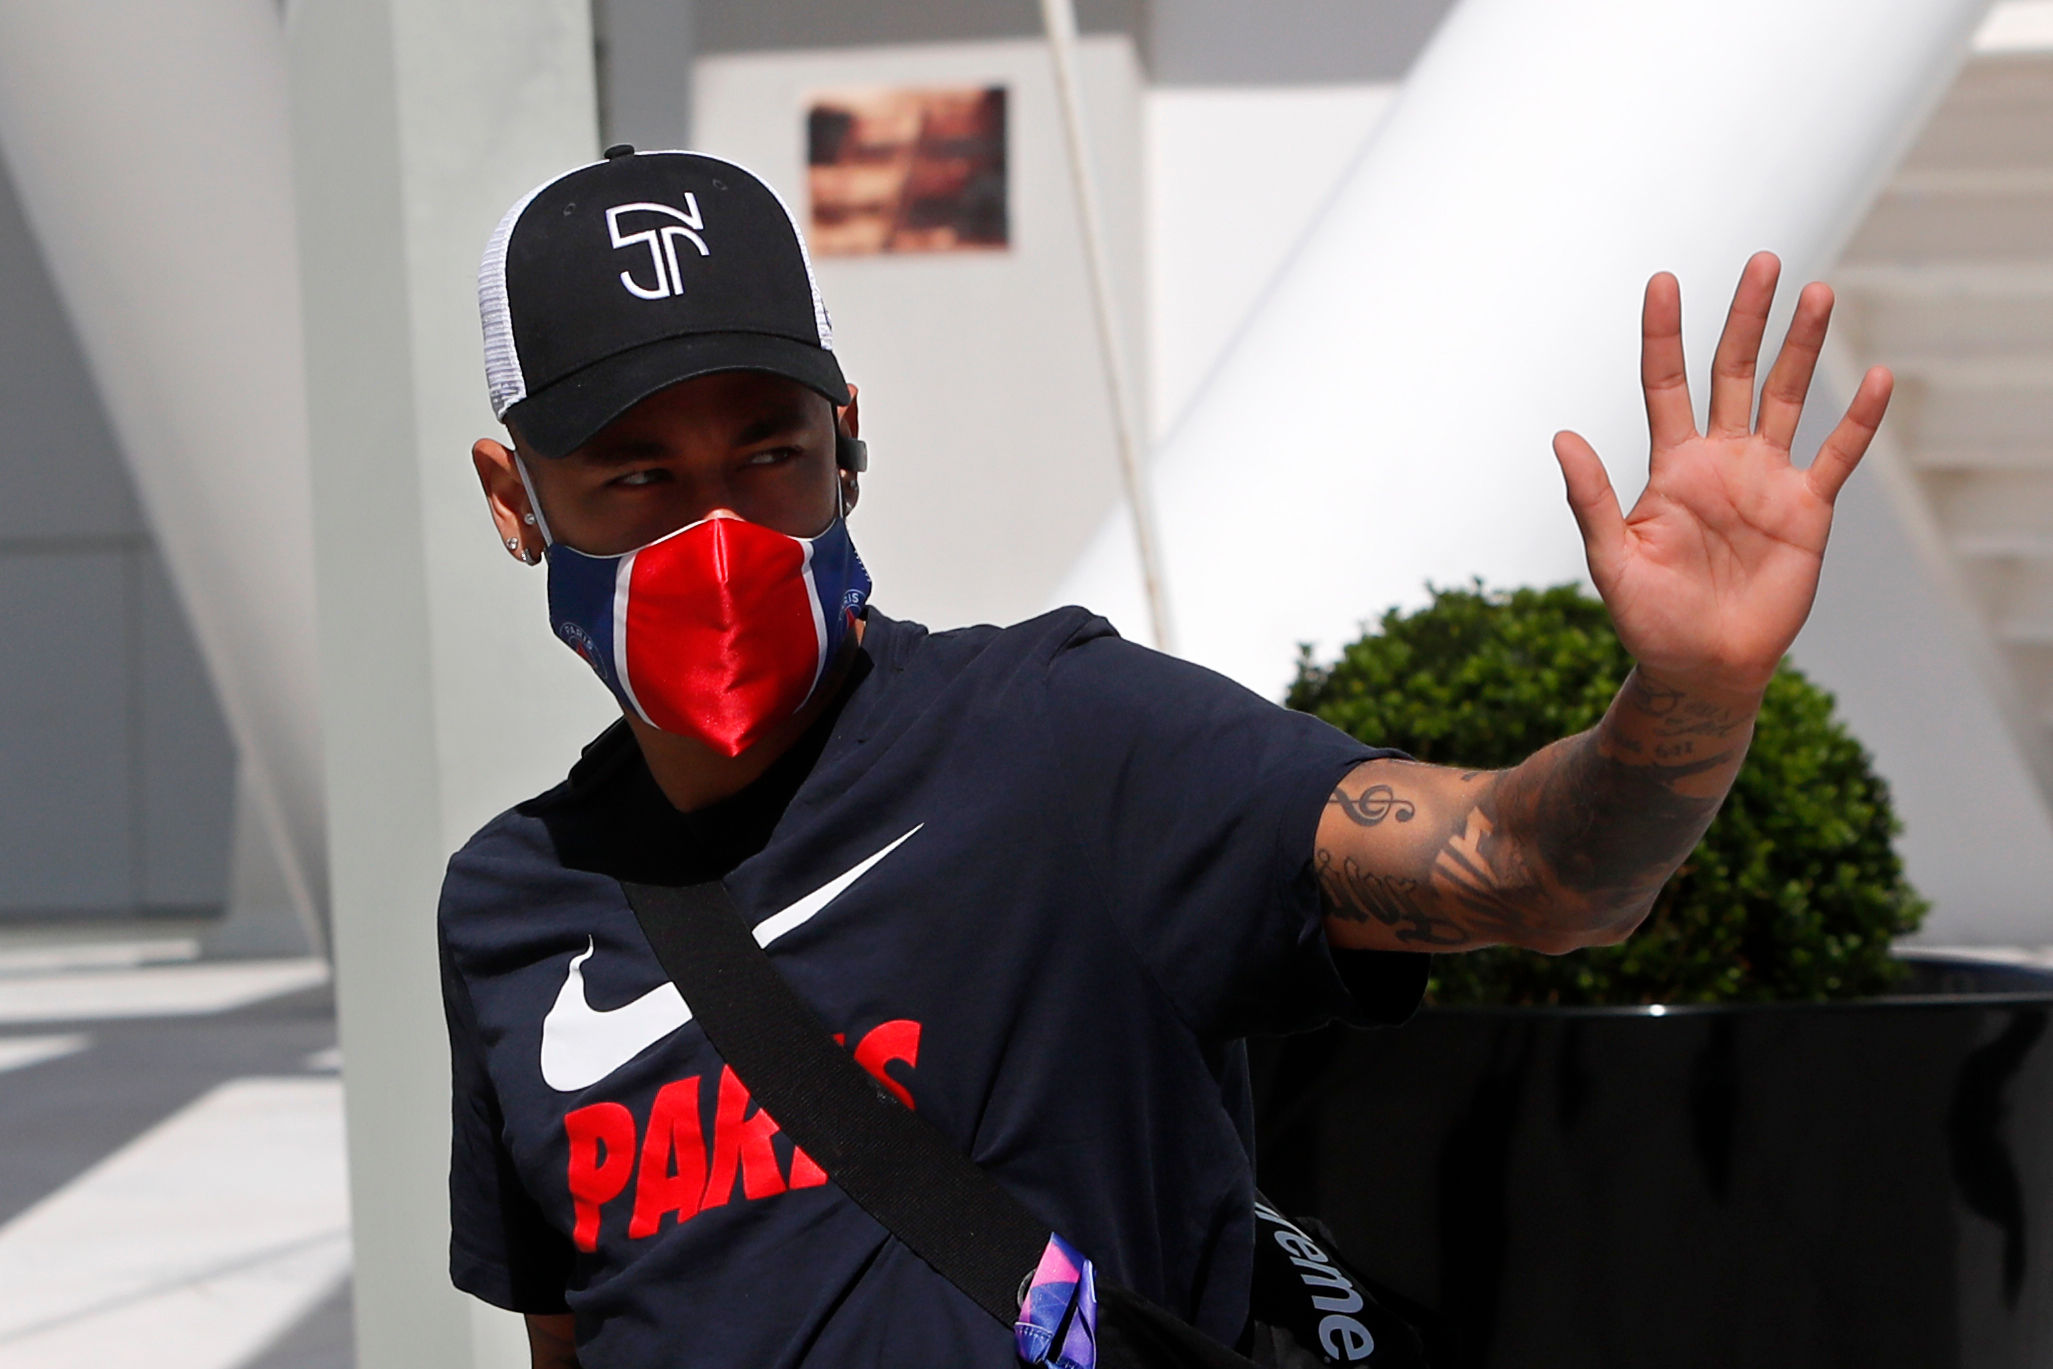 After Neymar’s tears, PSG will hope Champions League final was no one-off